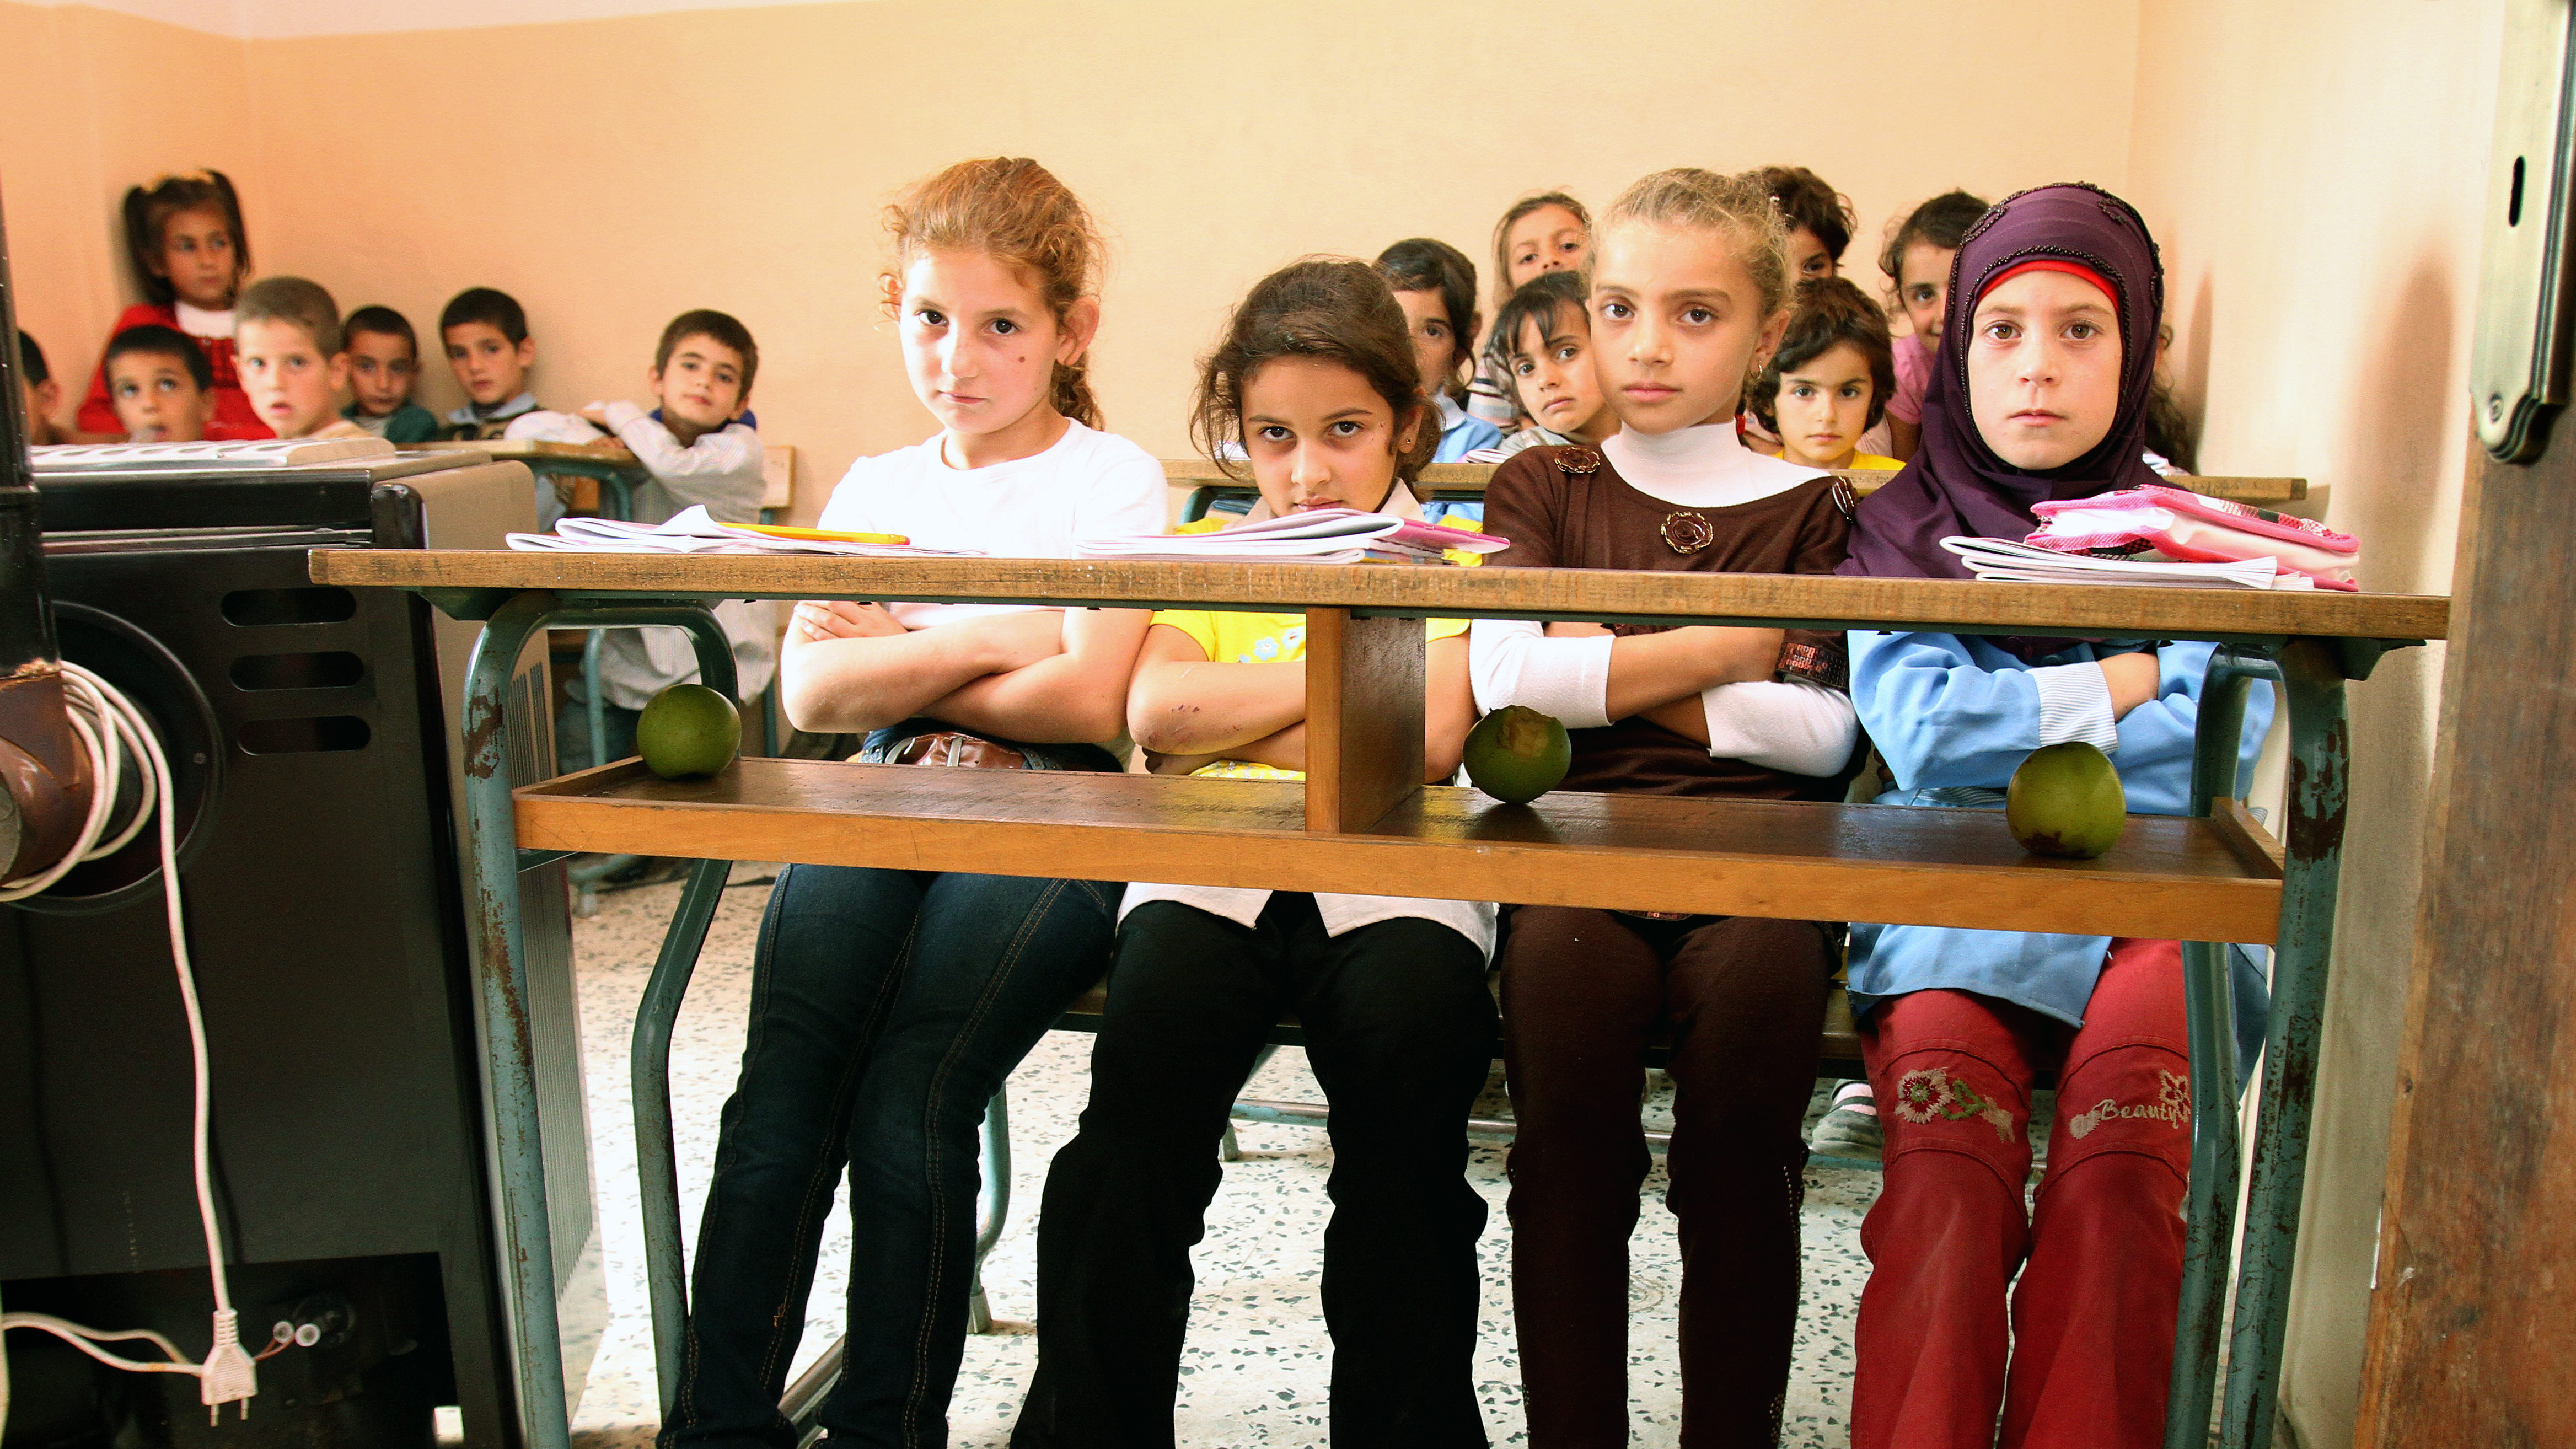 Lebanon to Integrate ‘Gender Perspective’ into Education Curriculum